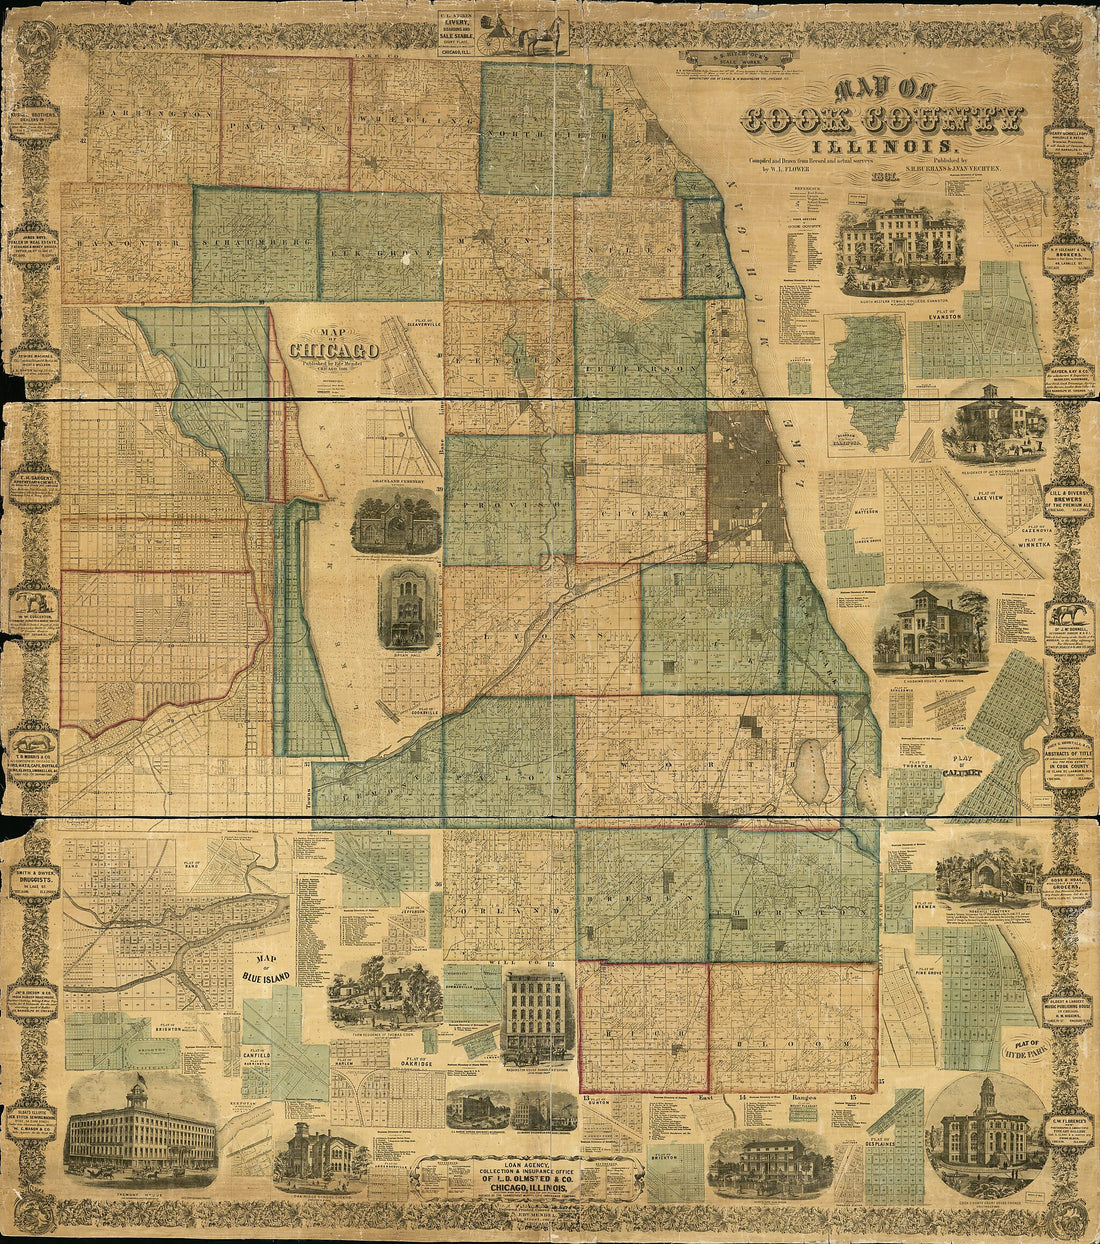 This old map of Map of Cook County, Illinois from 1861 was created by W. L. Flower, Edward Mendel in 1861